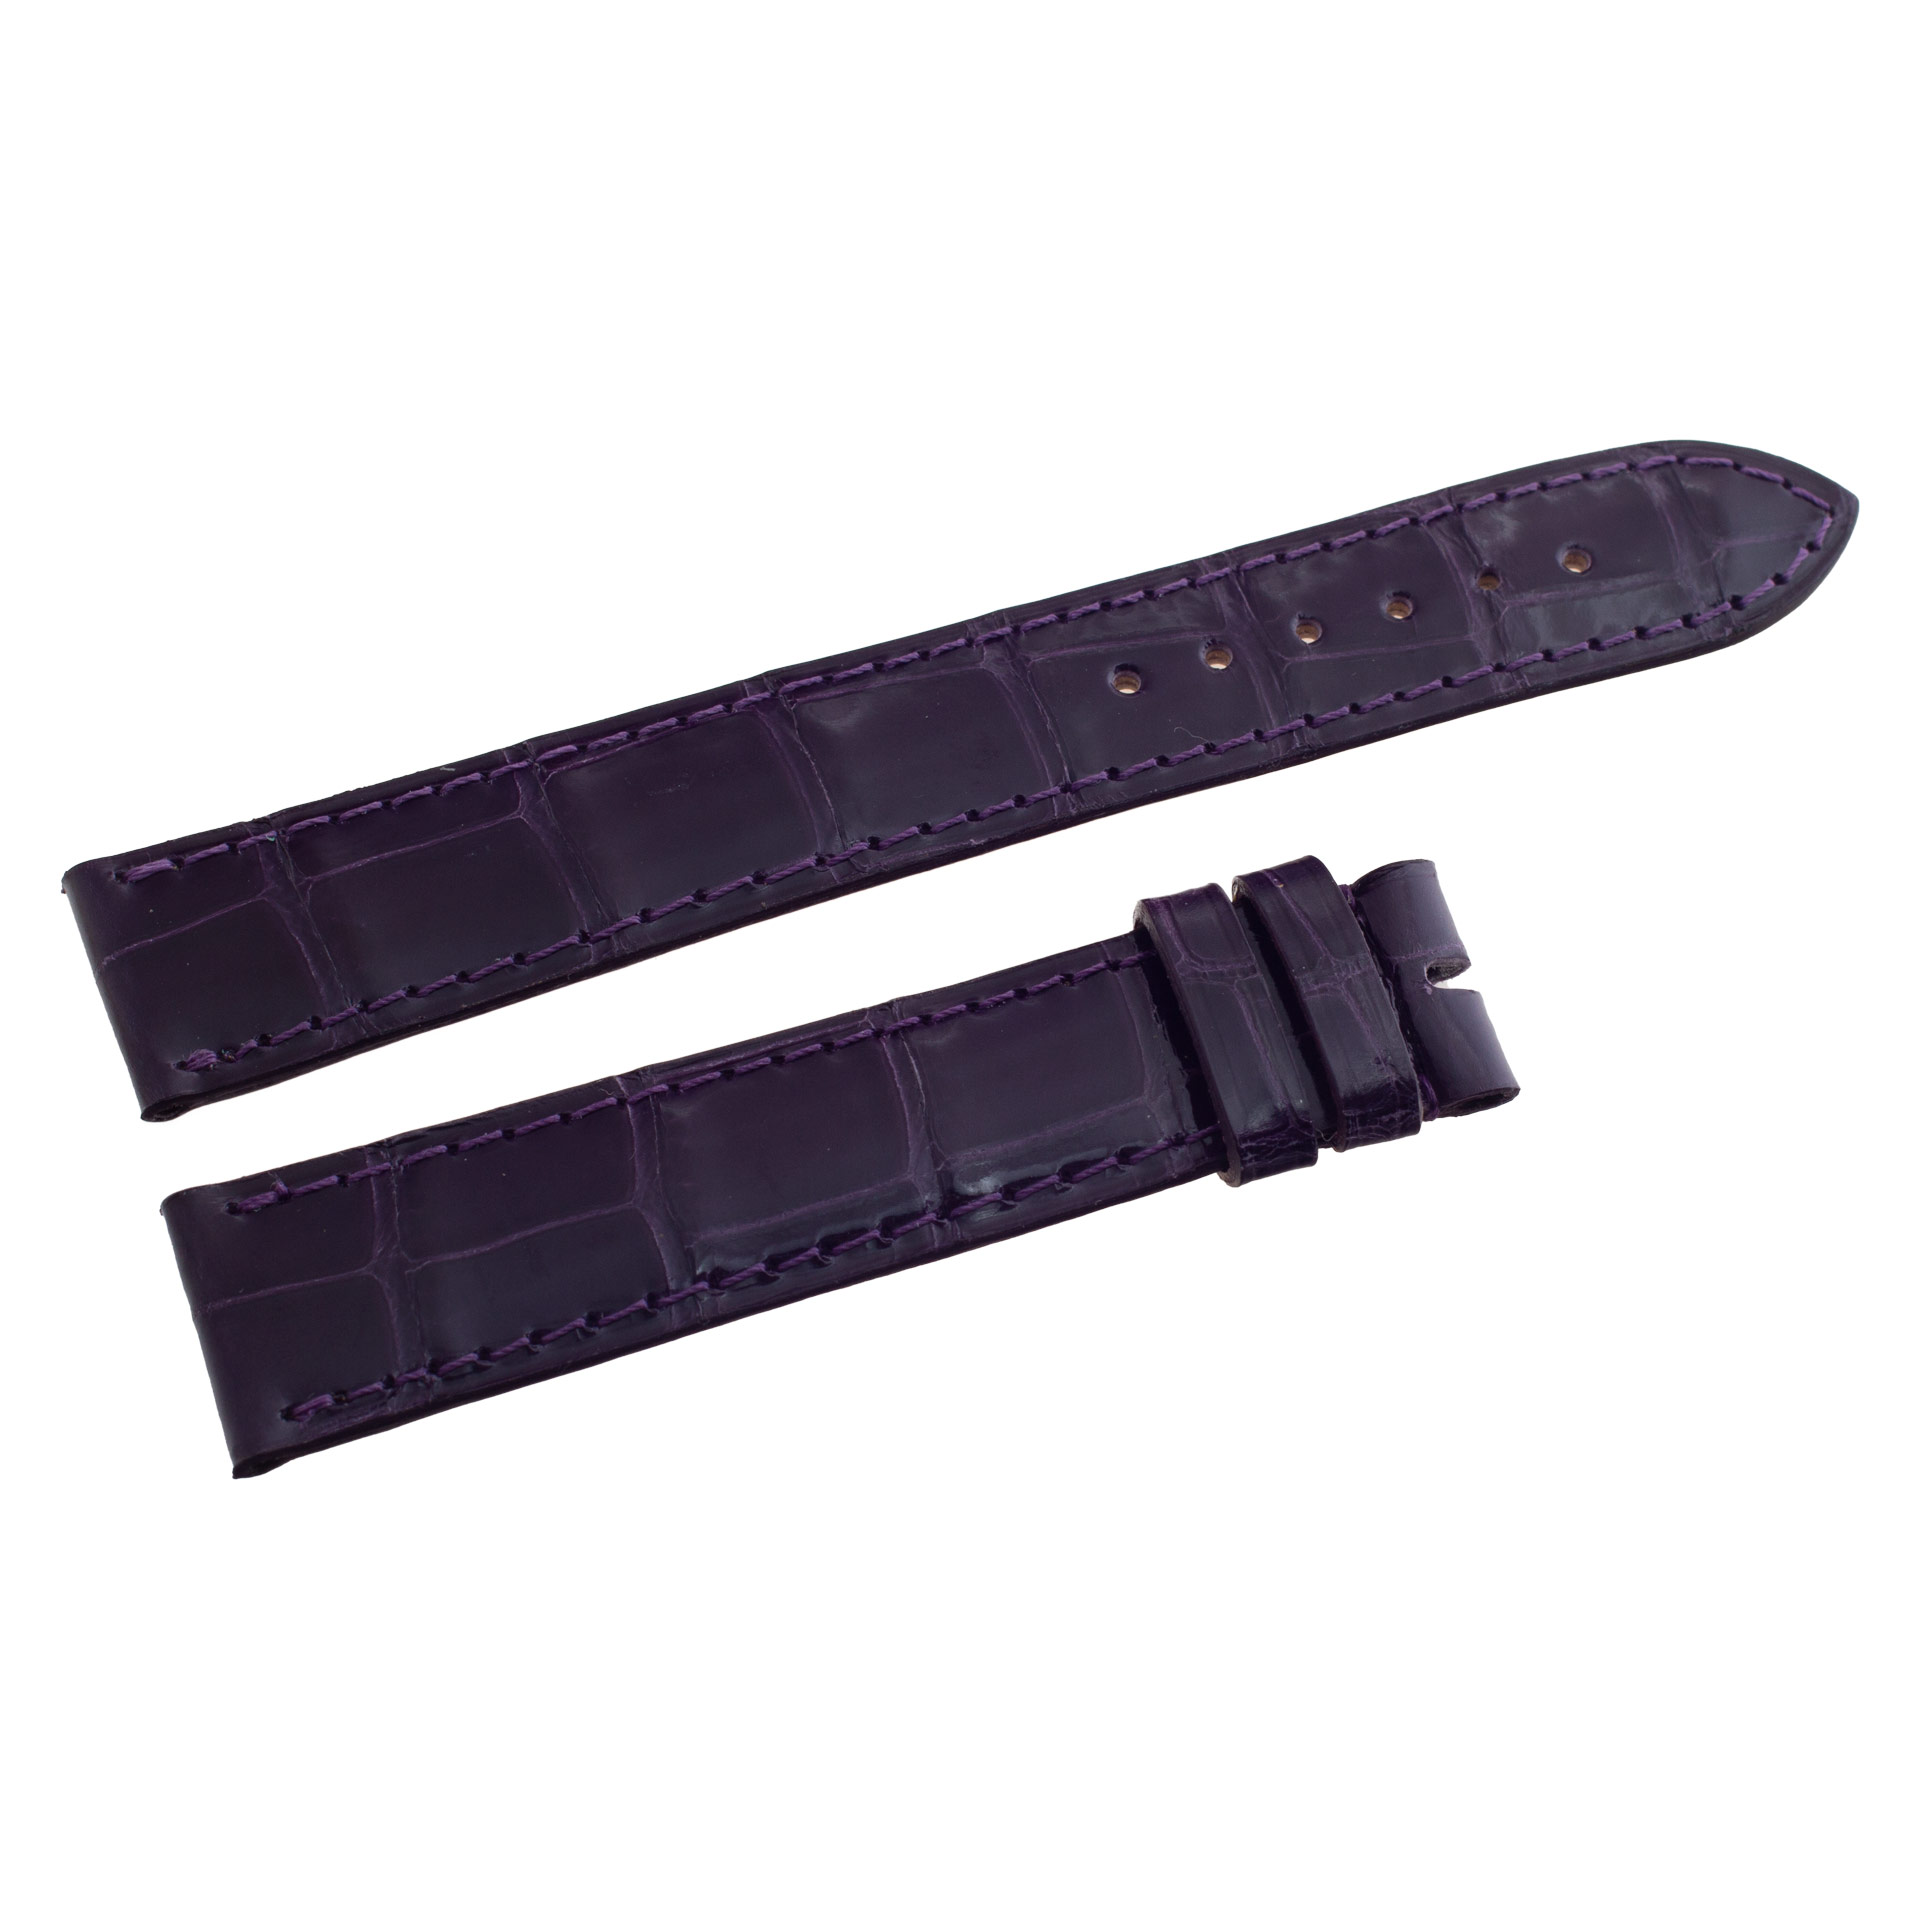 Chopard shiny purple alligator strap (18mm x 16mm) Length is 4.5" (long piece) and 3.0" (short piece). 18mm width at lug end and 16mm width at buckle end image 1